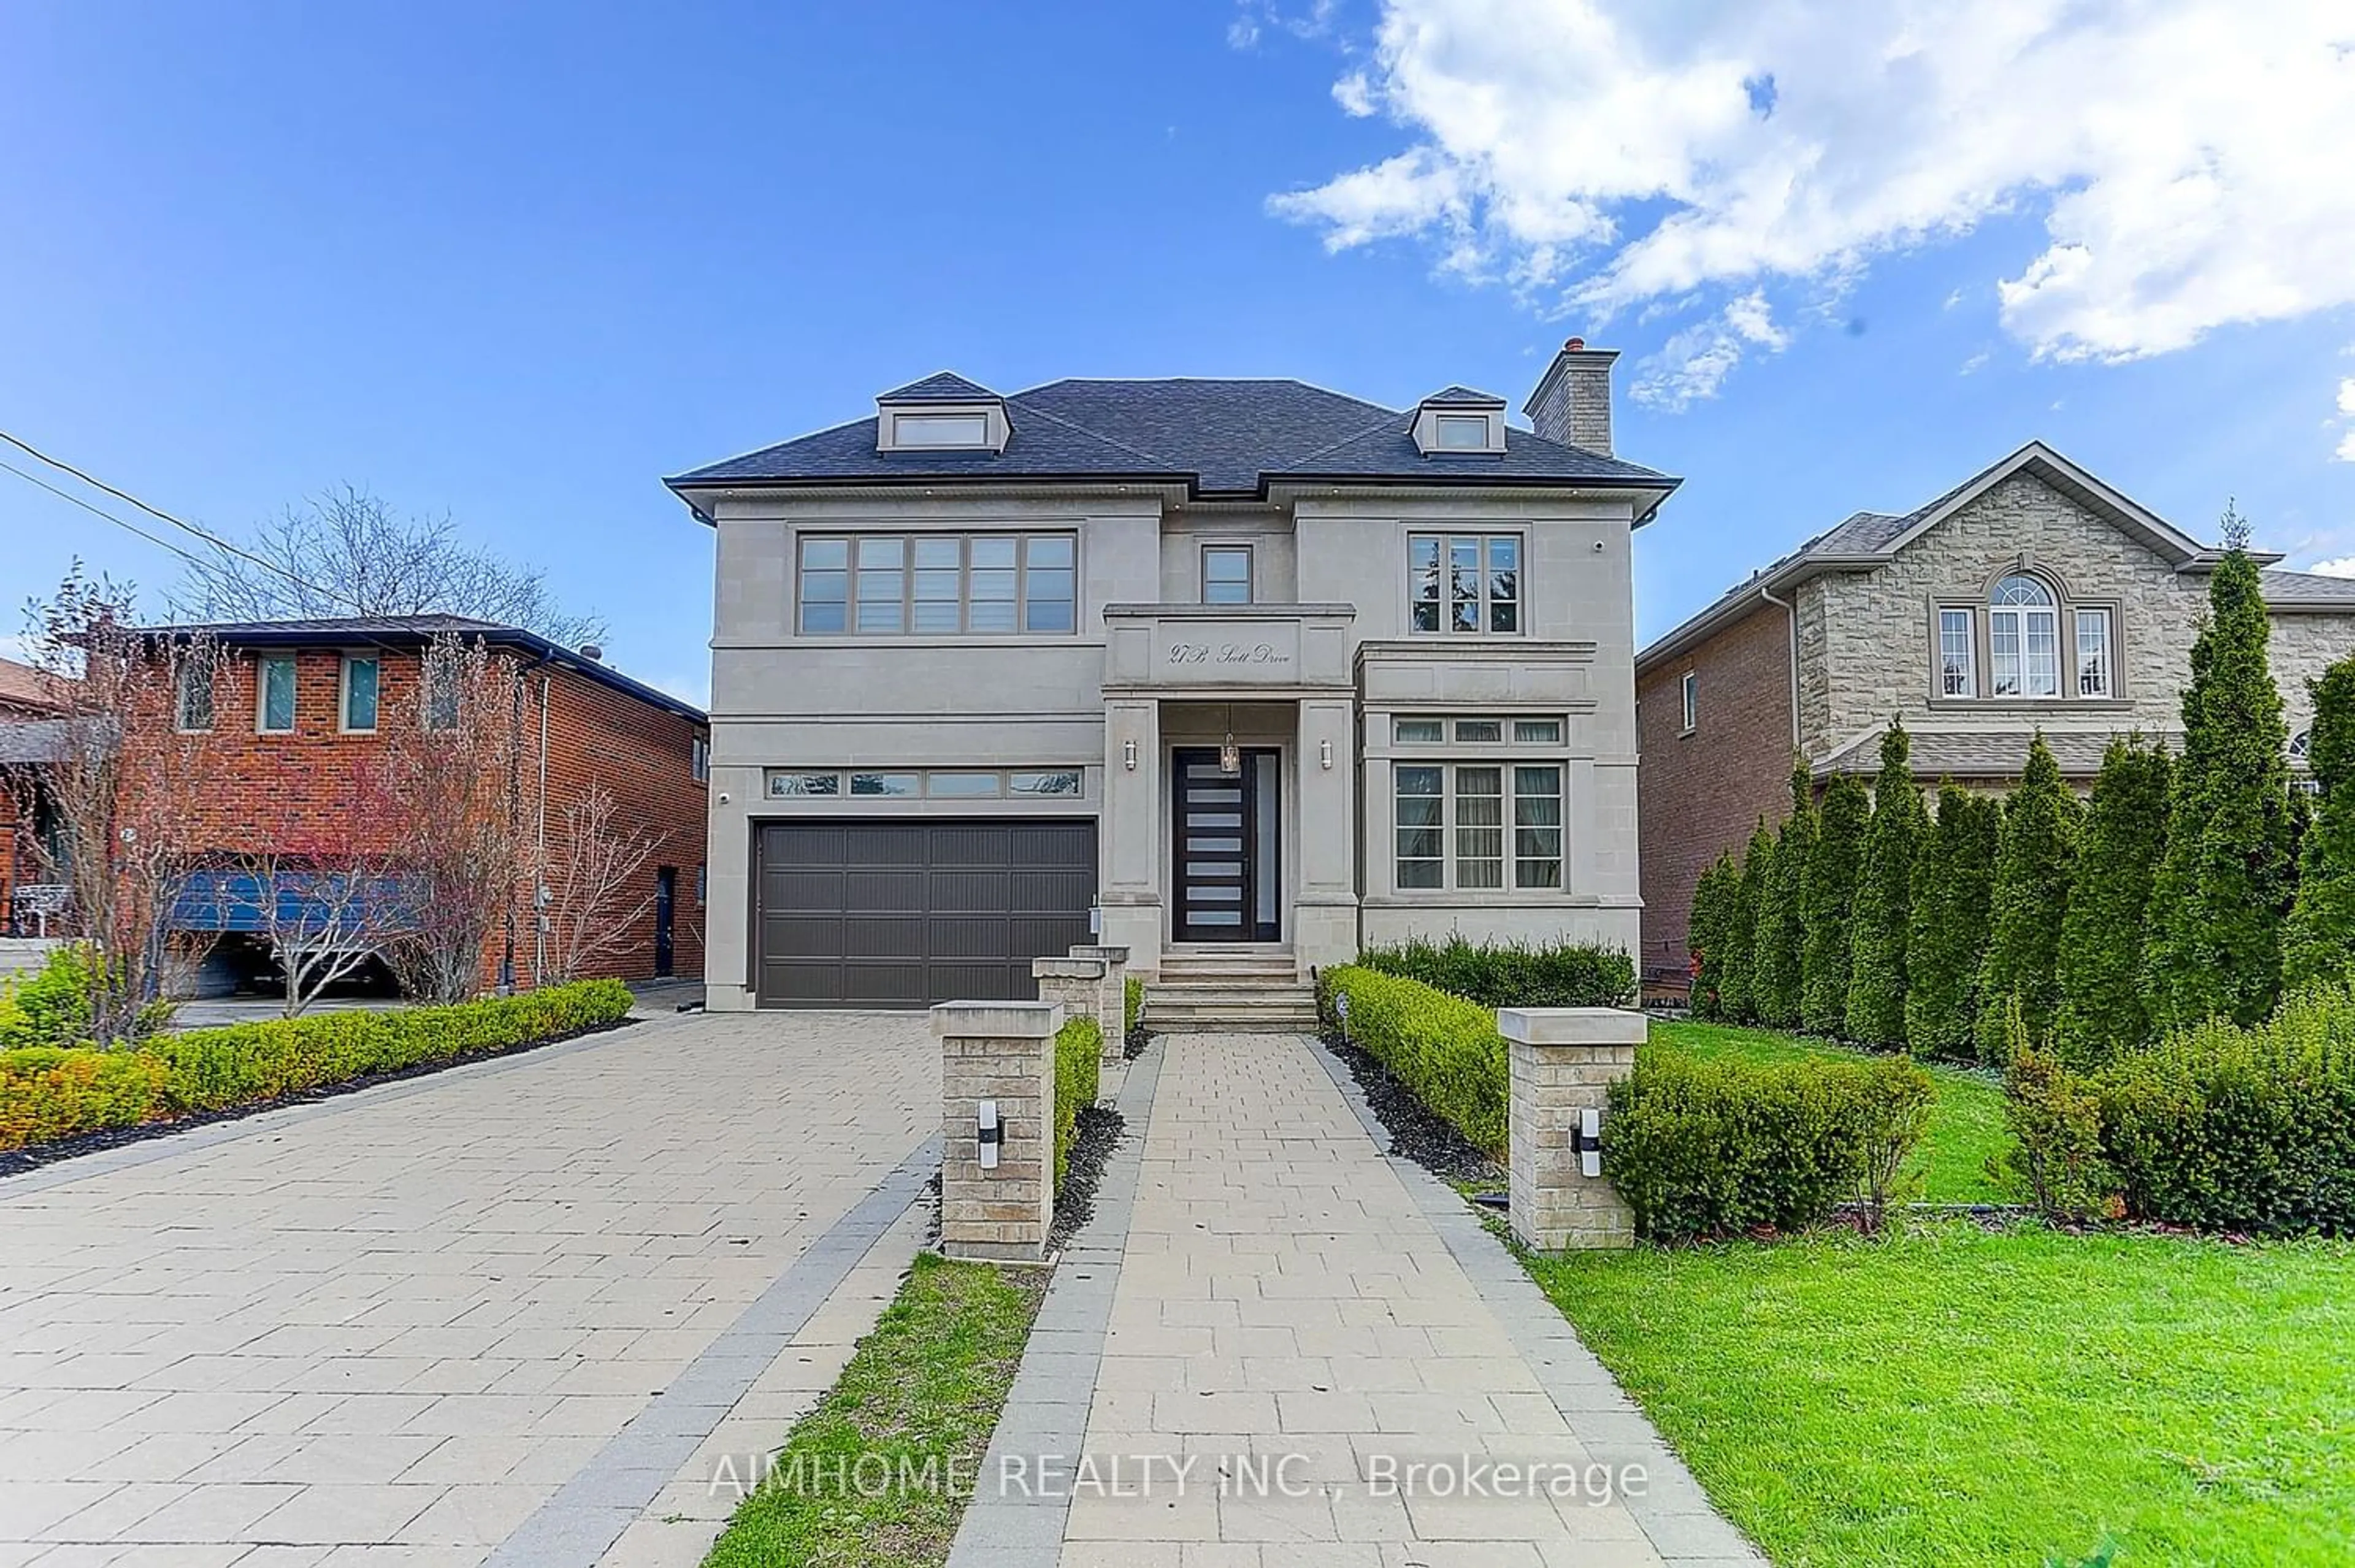 Home with brick exterior material for 27B Scott Dr, Richmond Hill Ontario L4C 6V5